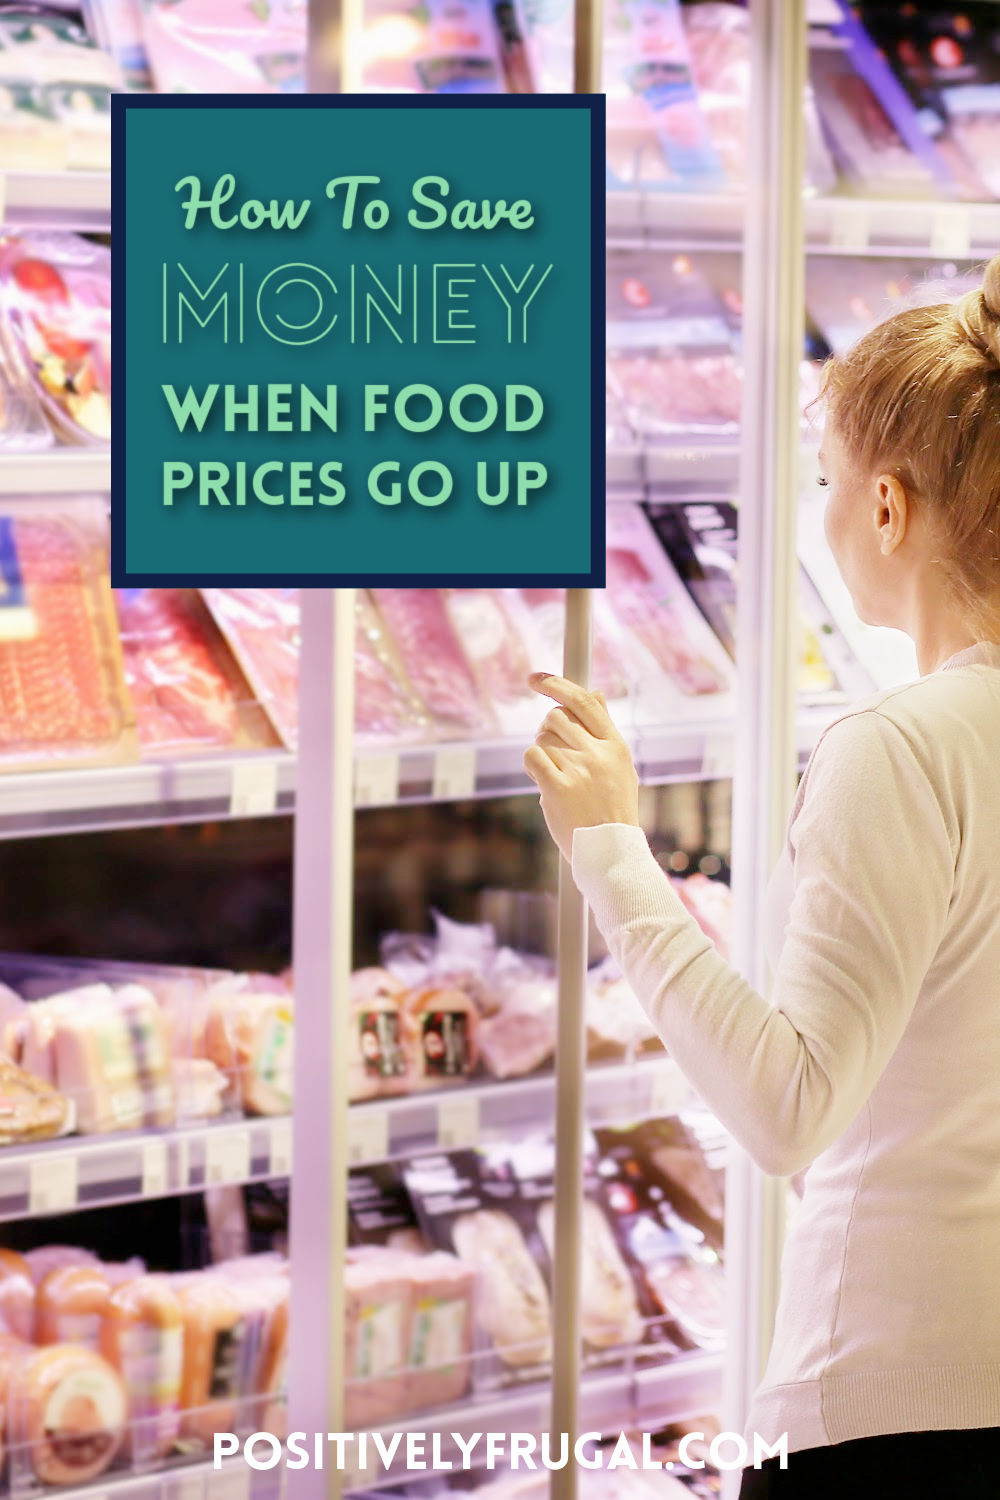 How To Save Money When Food Prices Go Up by PositivelyFrugal.com